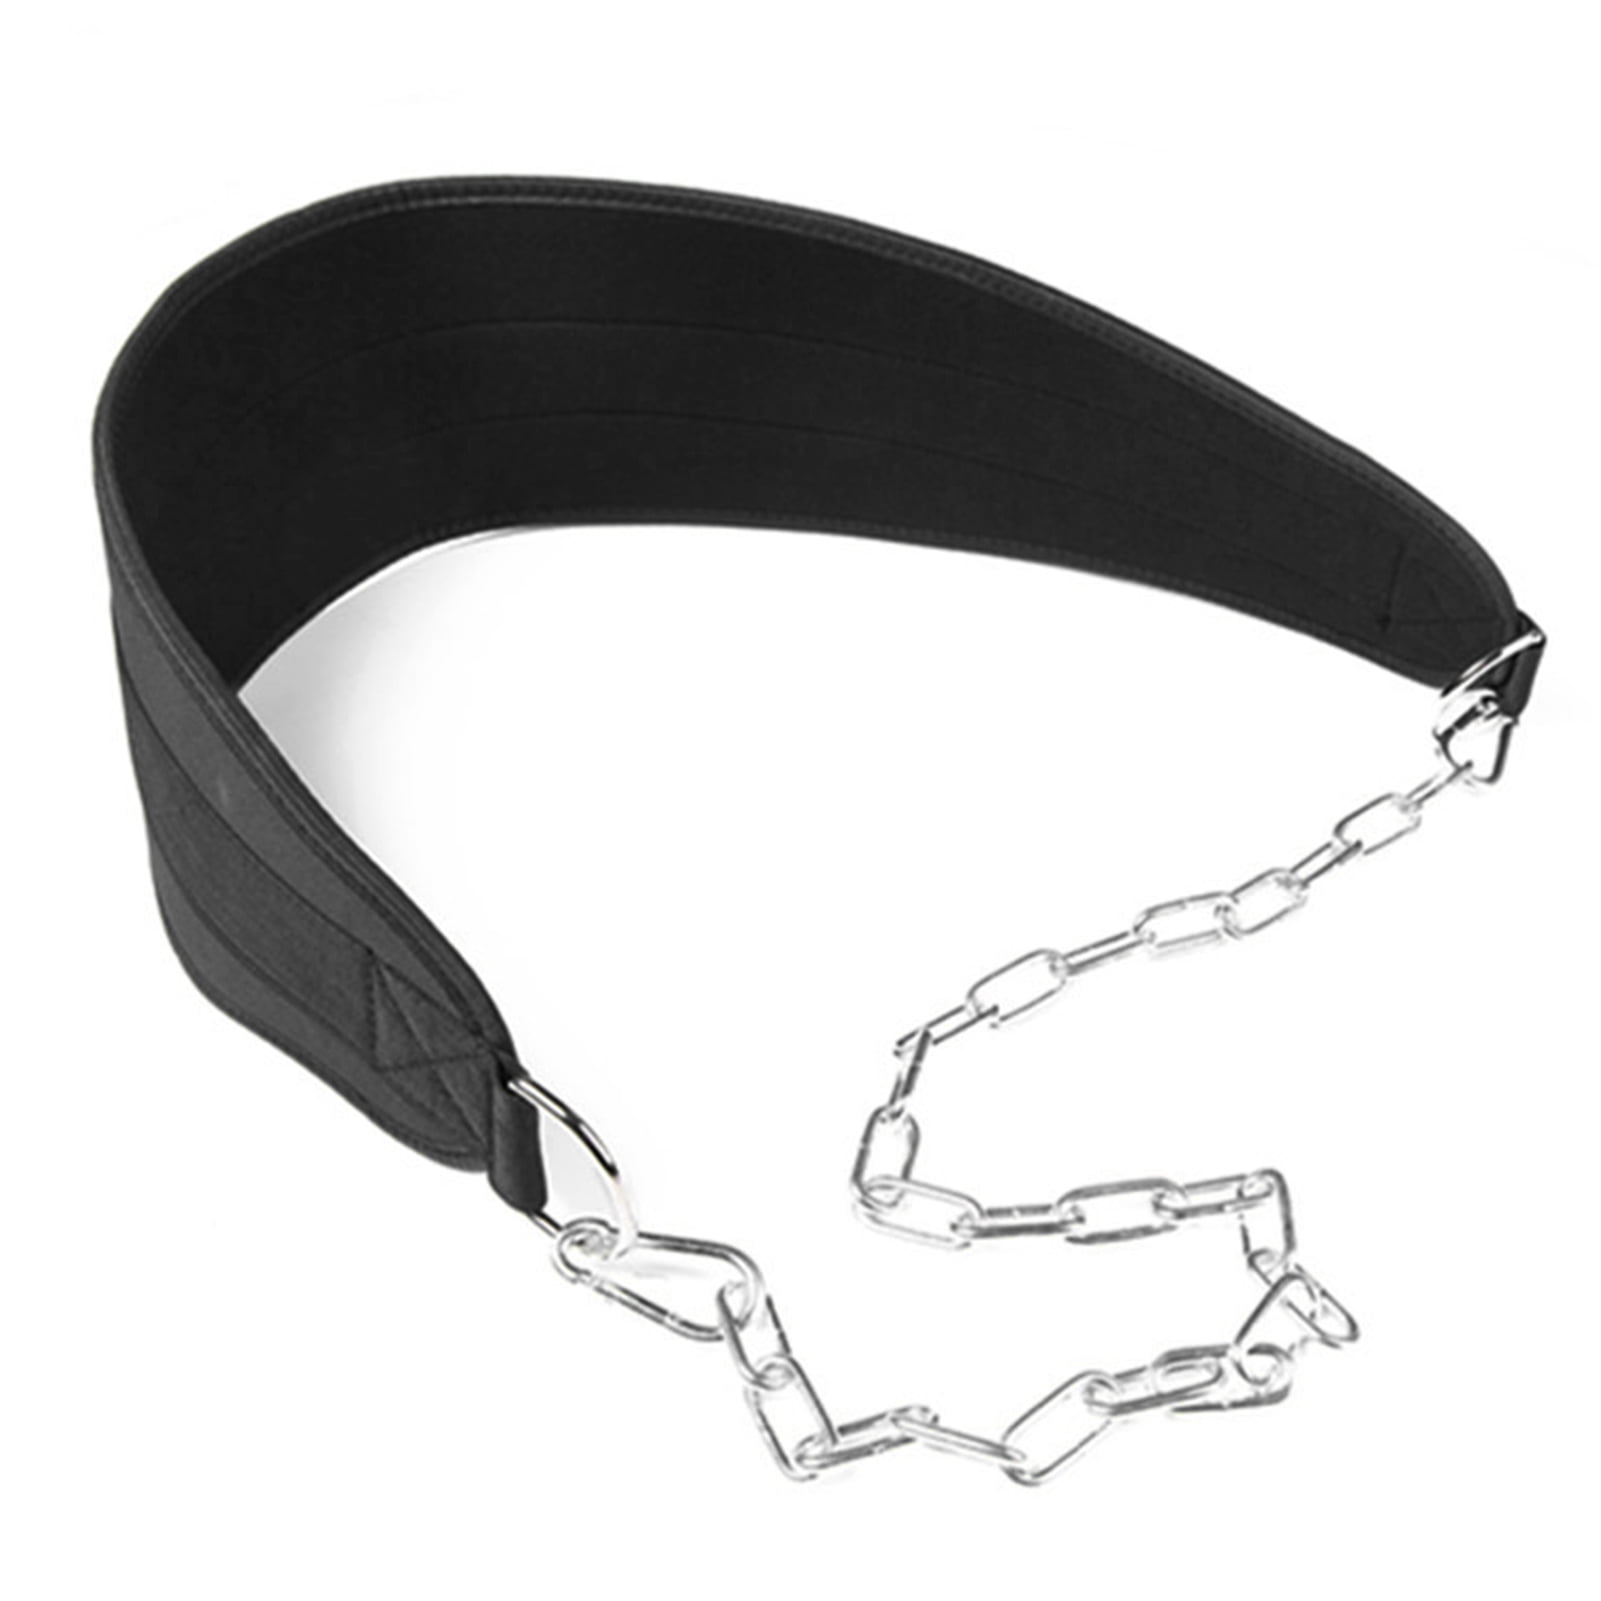 Weight Lifting Dip Belt w/Chain for Fitness Training Pullup Waist Strength Strap 